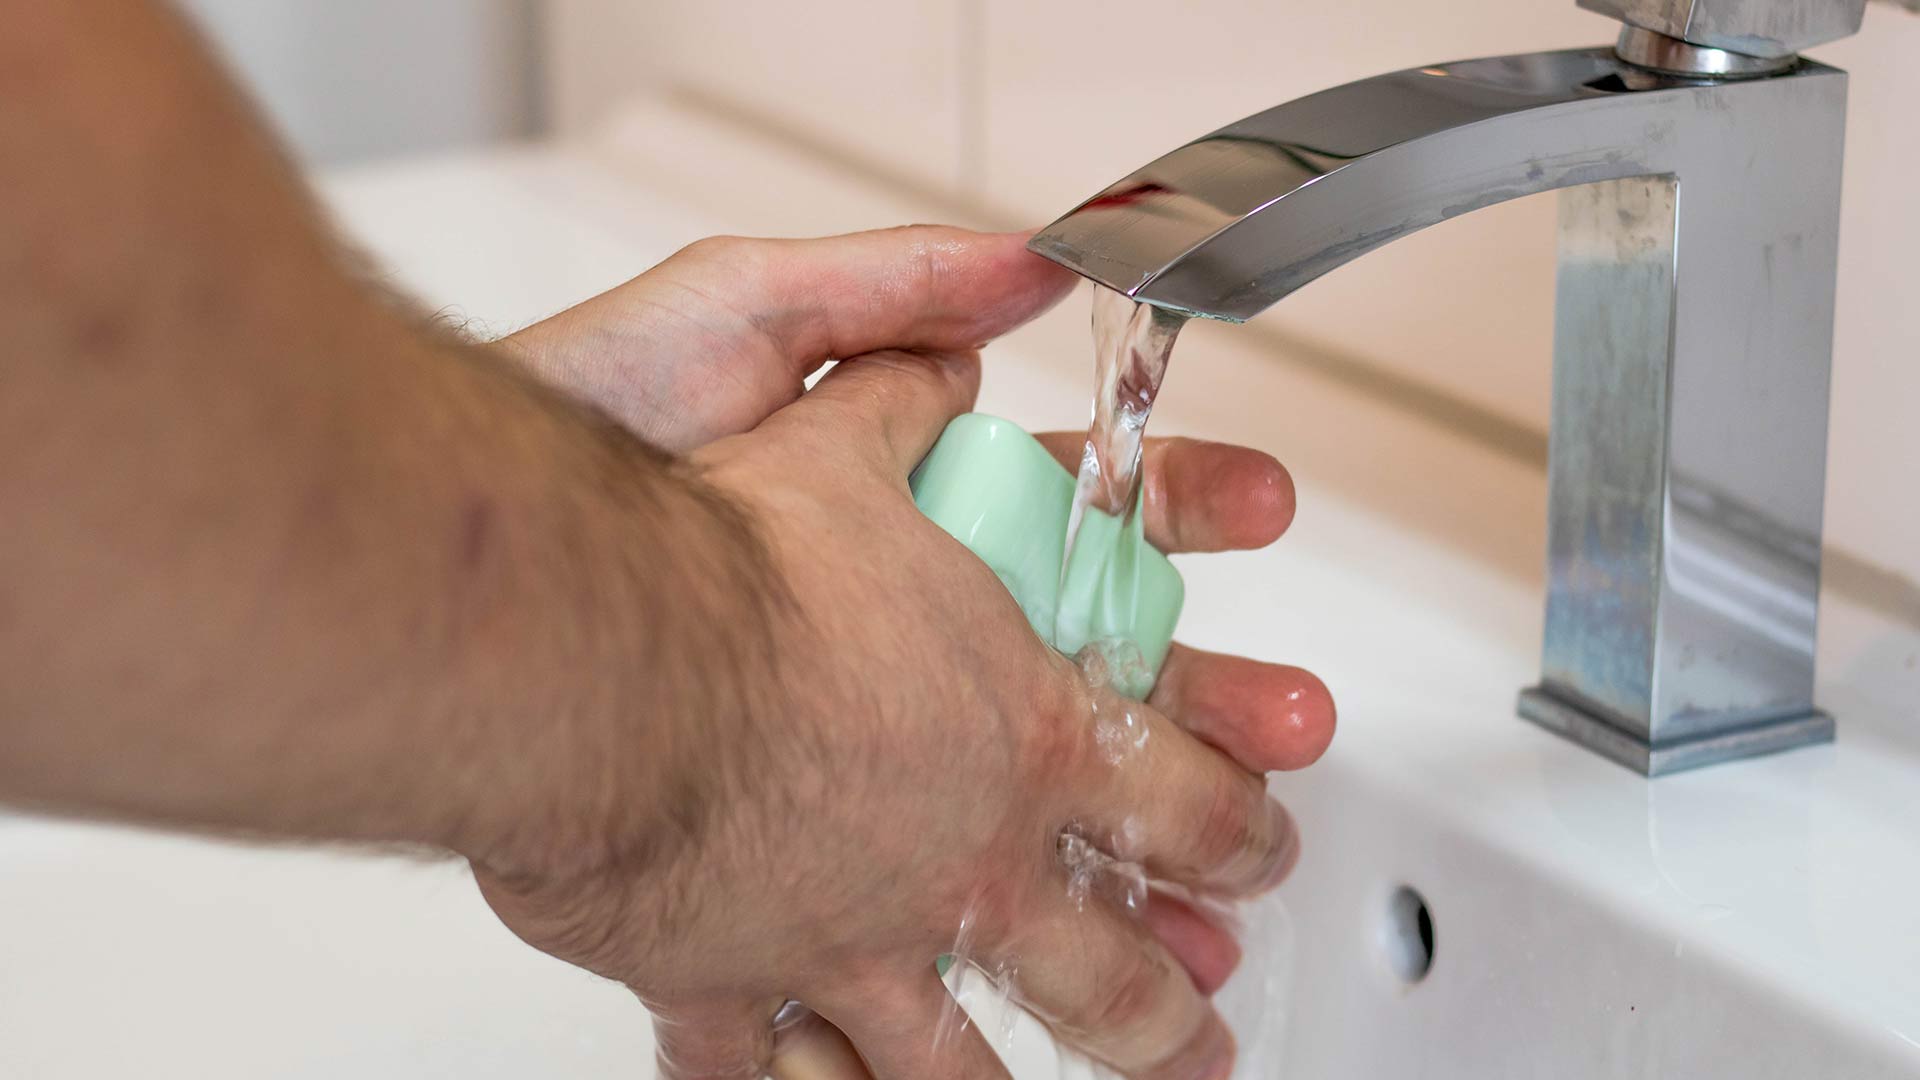 Washing your hands after using the restroom is an important measure in the prevention of hepatitis A spread, the Centers for Disease Control says.